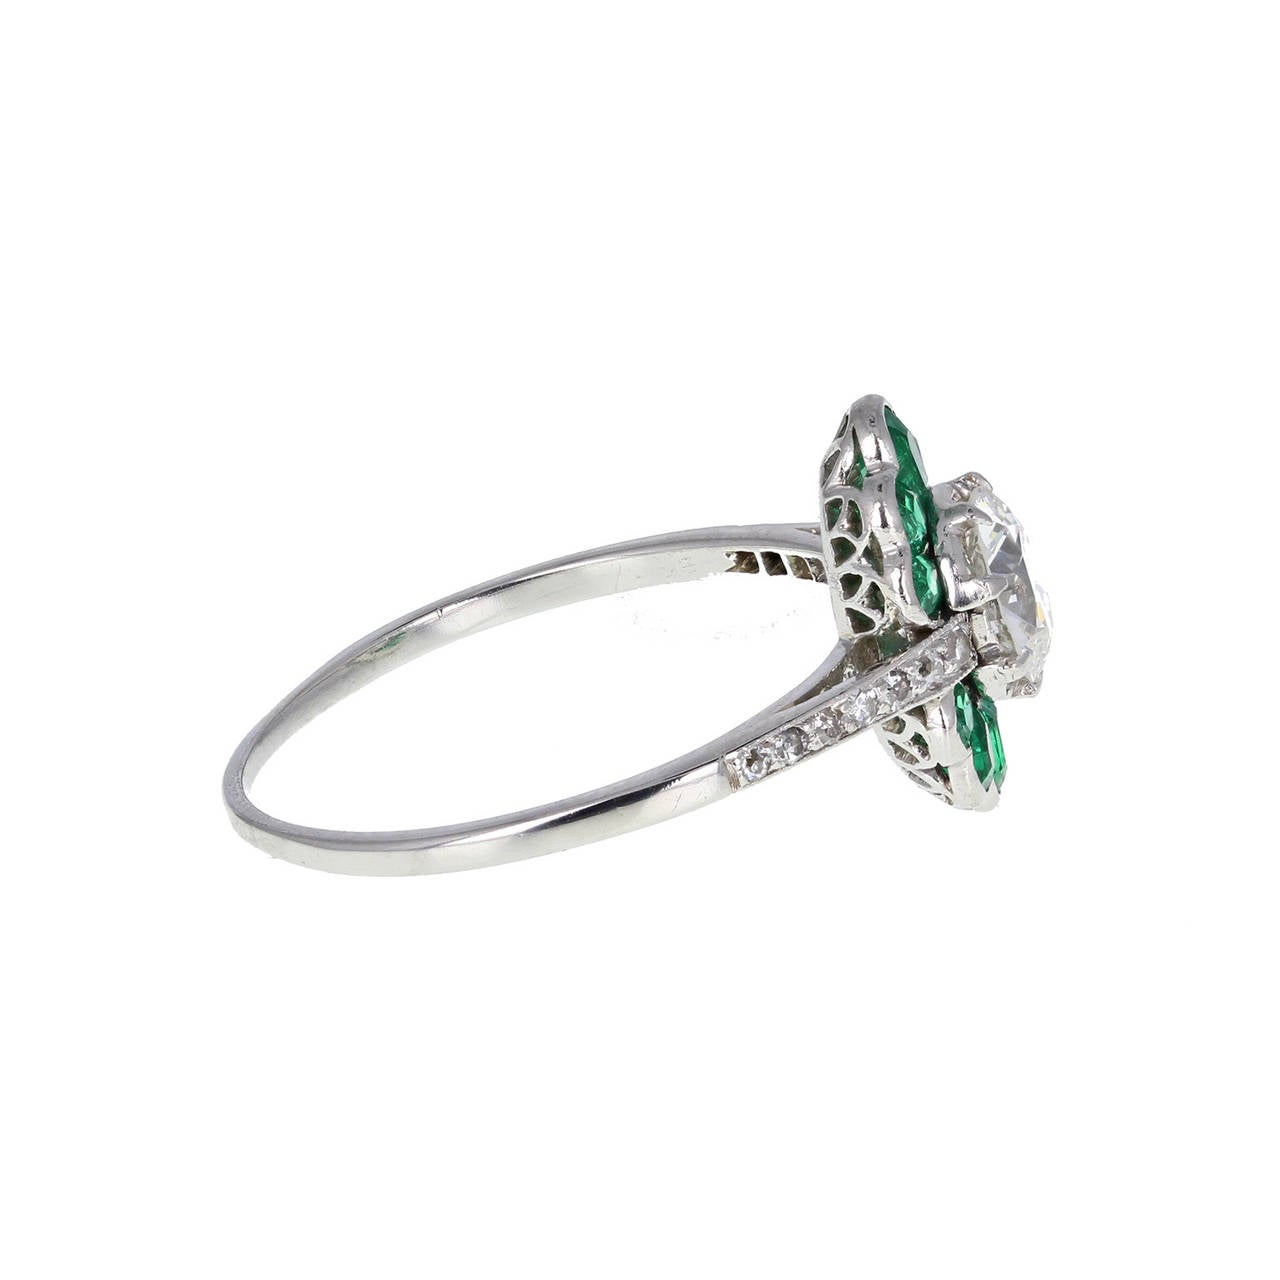 In outstanding condition and of excellent quality, this platinum ring features a central transition-cut diamond exhibiting exceptional brilliance. Topped and tailed with a fan of calibre-cut emeralds to give a oval shape. Single-cut diamonds set in